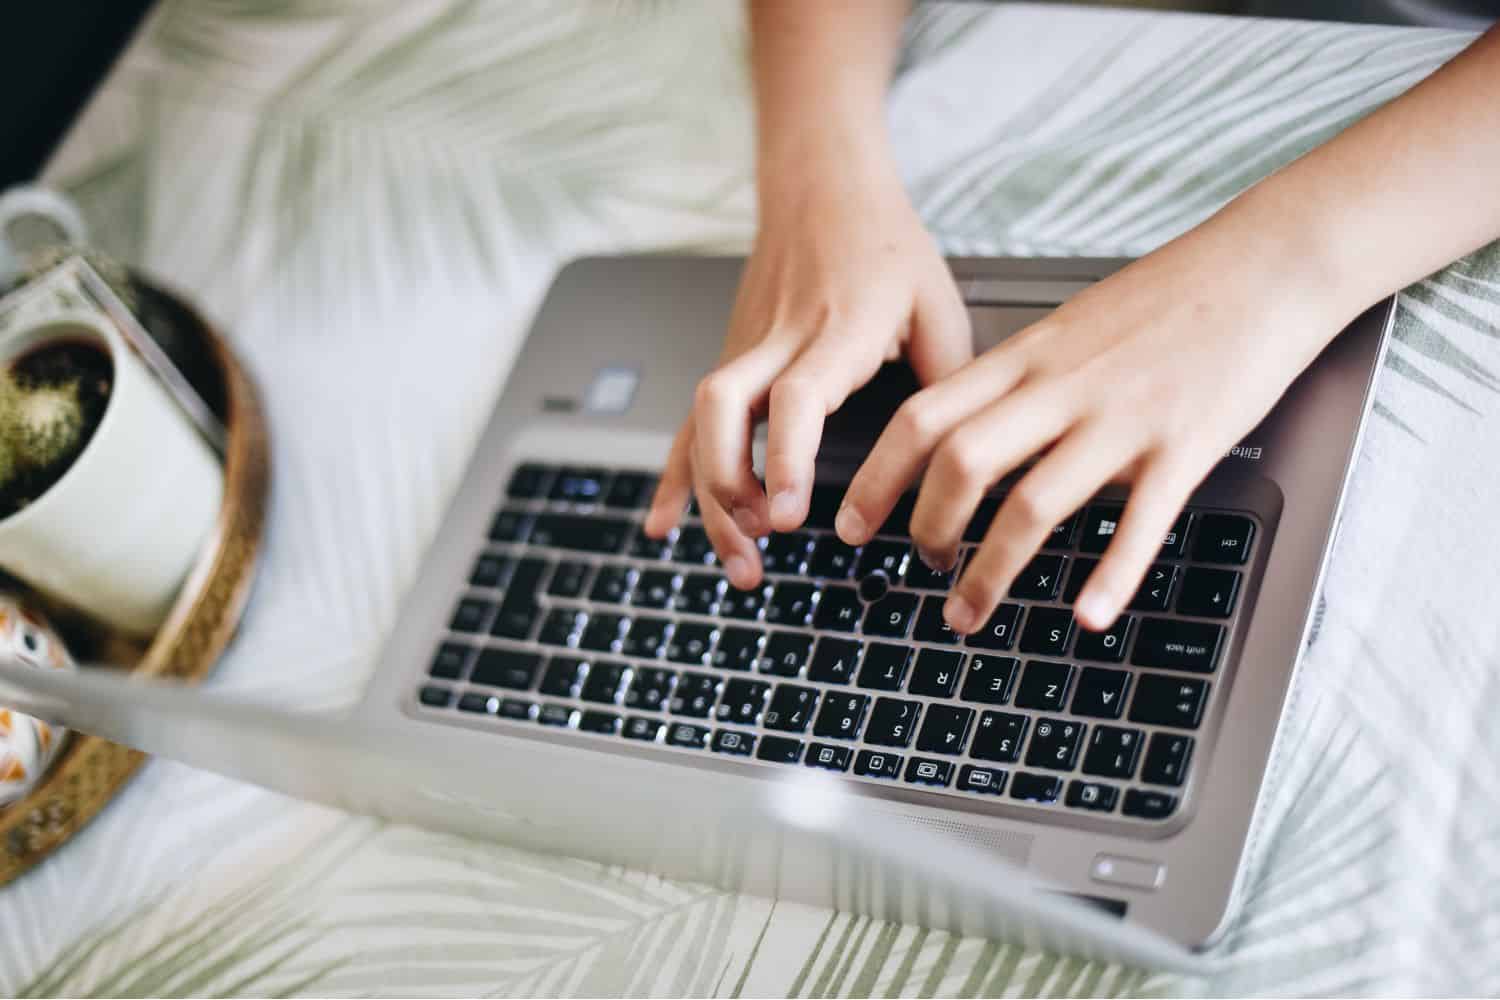 Hands type on a laptop that rests on a fern-printed comforter. Photo by Gaelle Marcel.